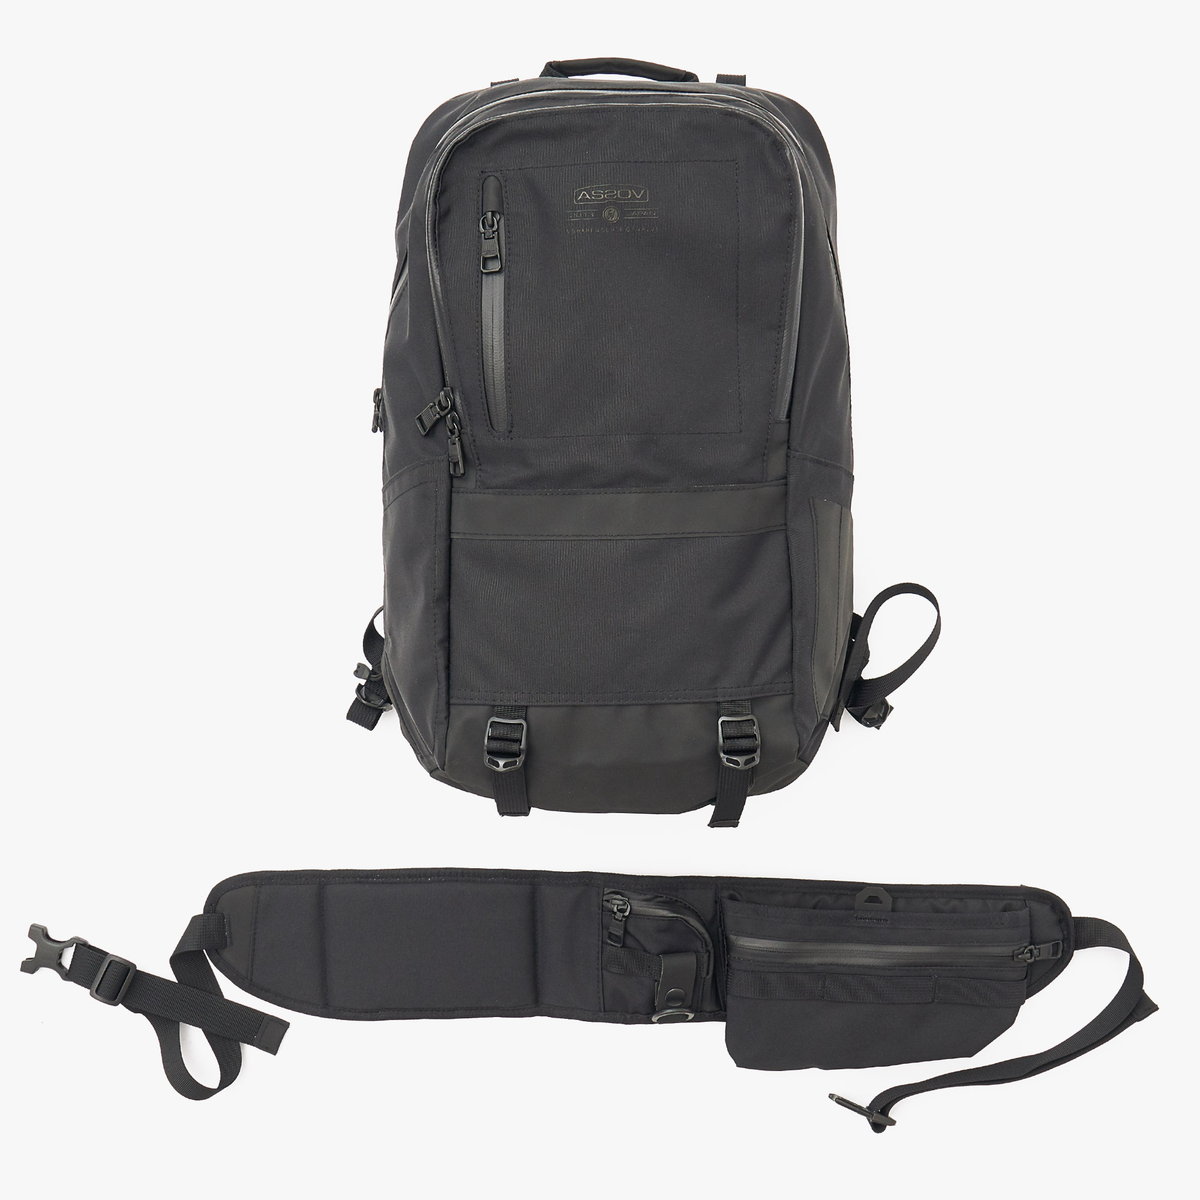 AS2OV (アッソブ) WATER PROOF CORDURA 305D DAY PACK / 防水バック 